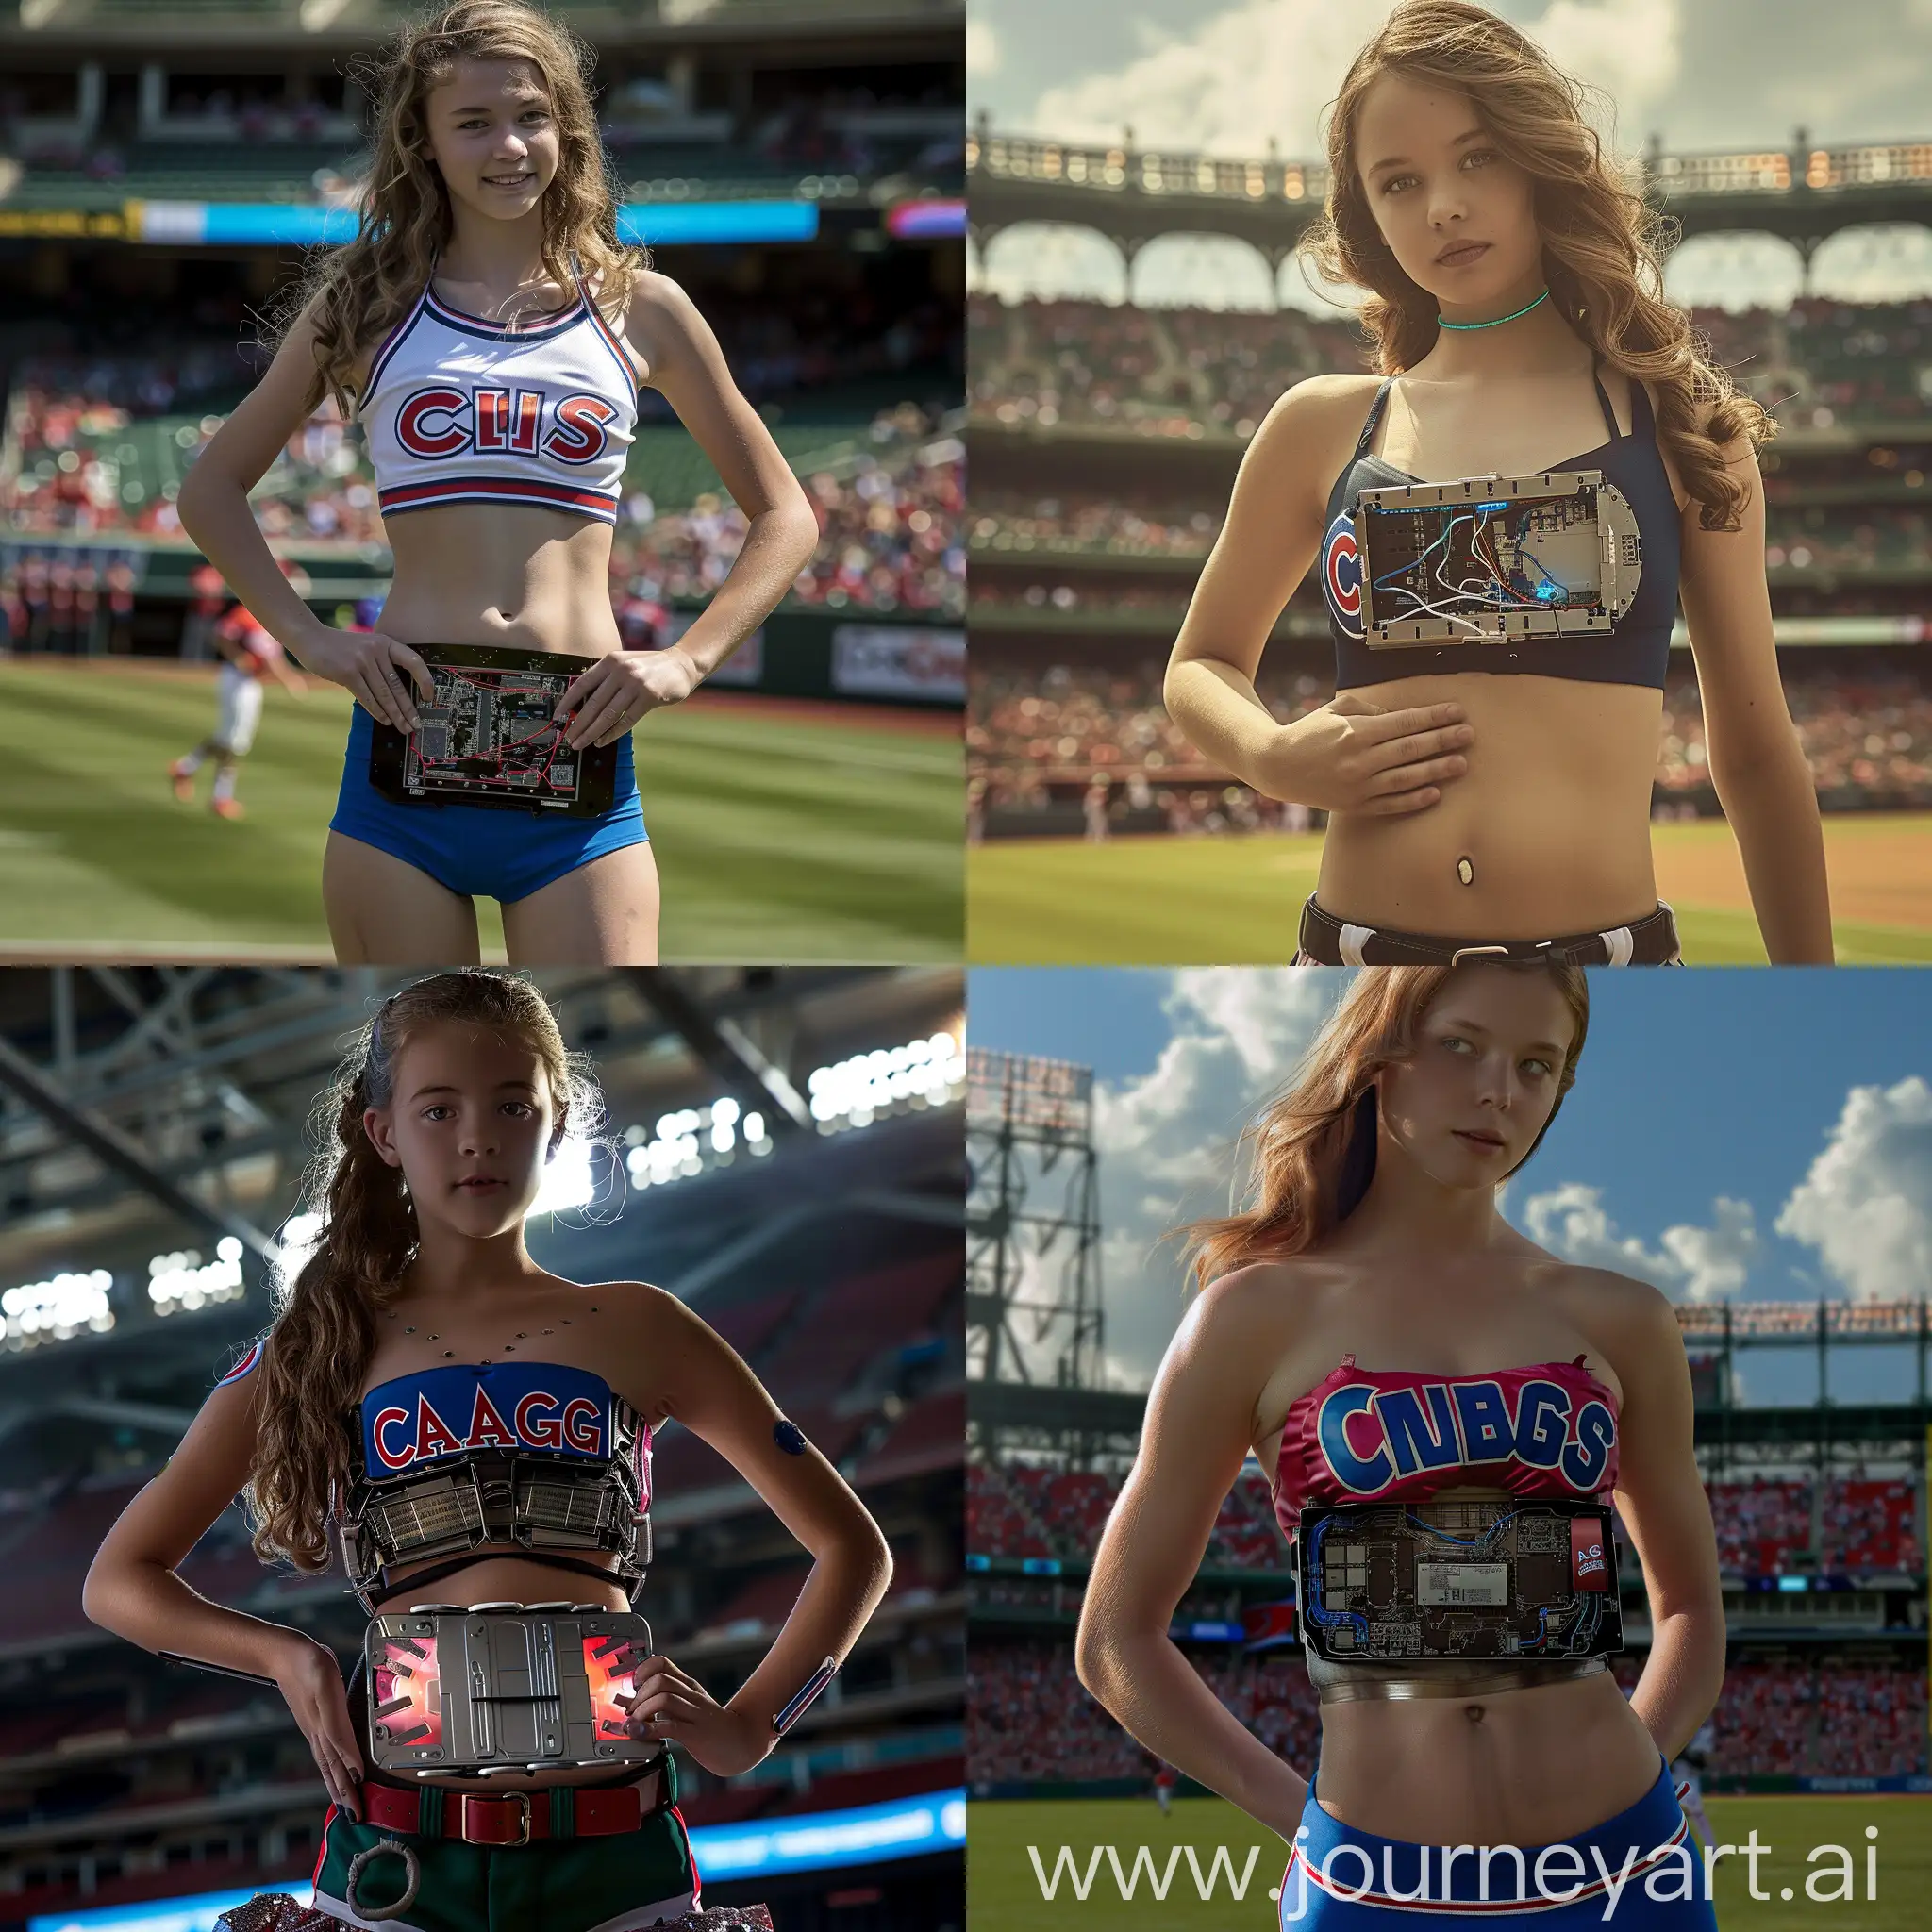 Chicago Cubs 13-14 year old cheerleader, turns out to be a robot, malfunctioning, panel open on her stomach revealing inner circuits